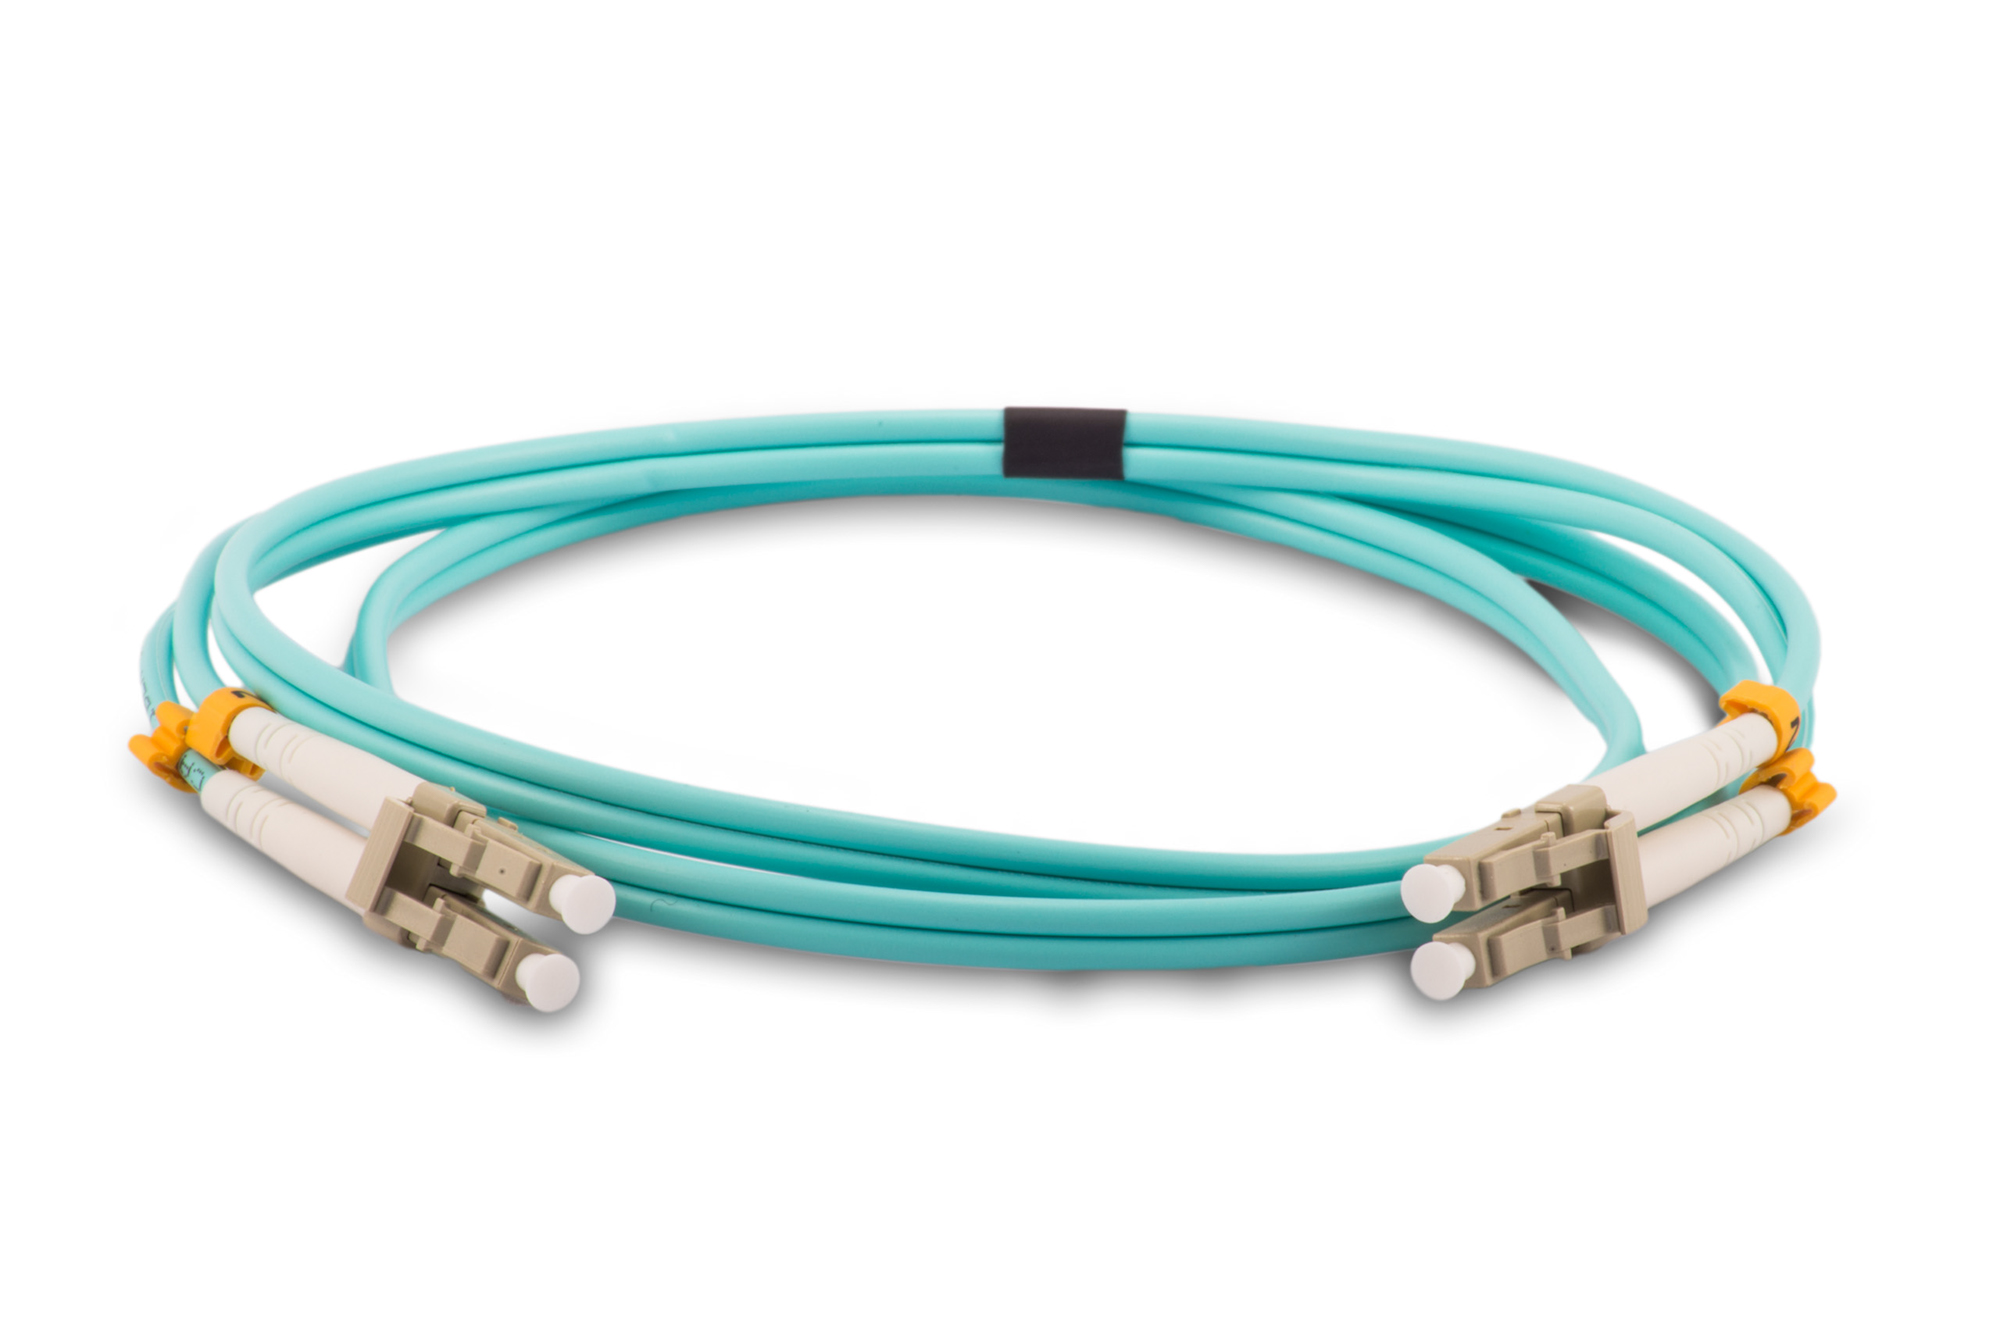 Armored Fiber Optic Patch Cables